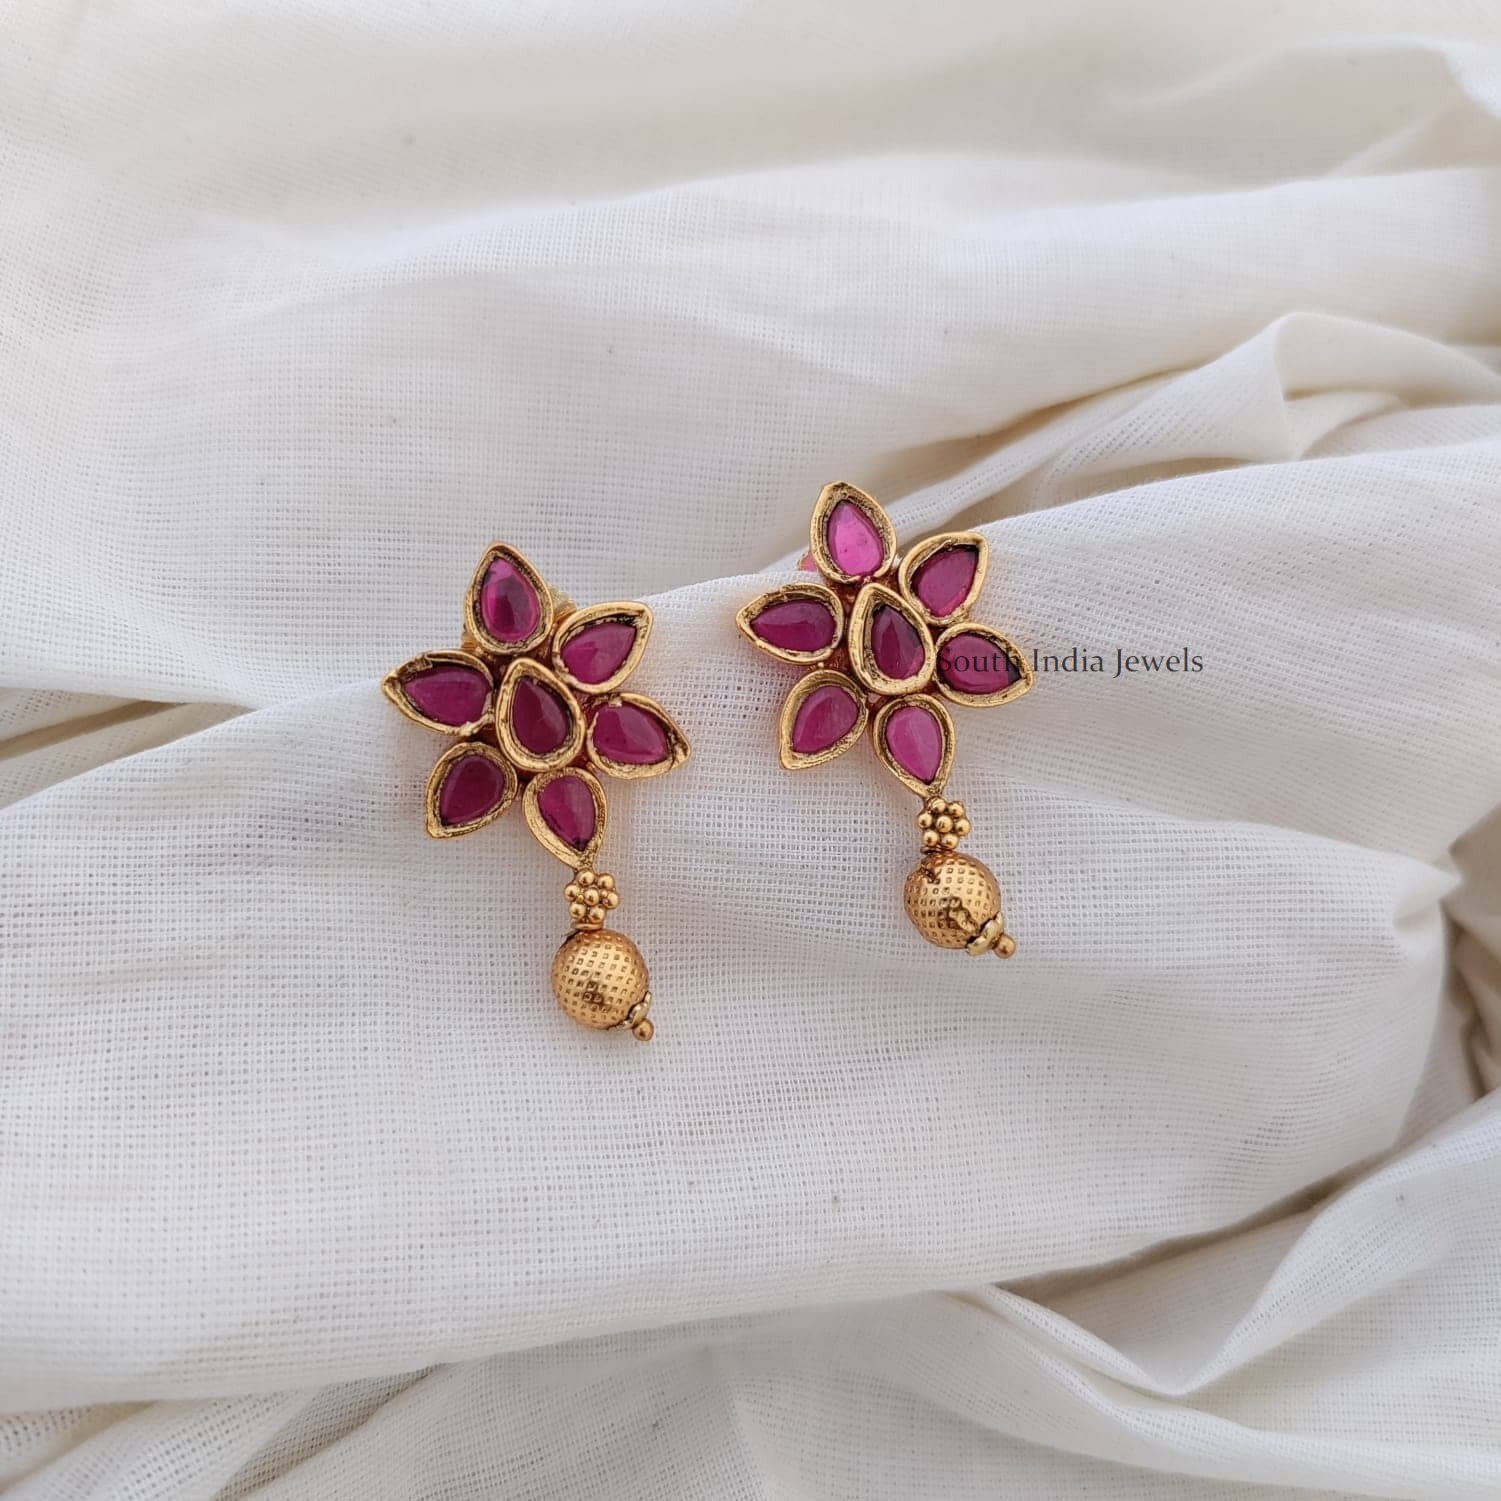 Attractive Floral Design Kemp Earrings